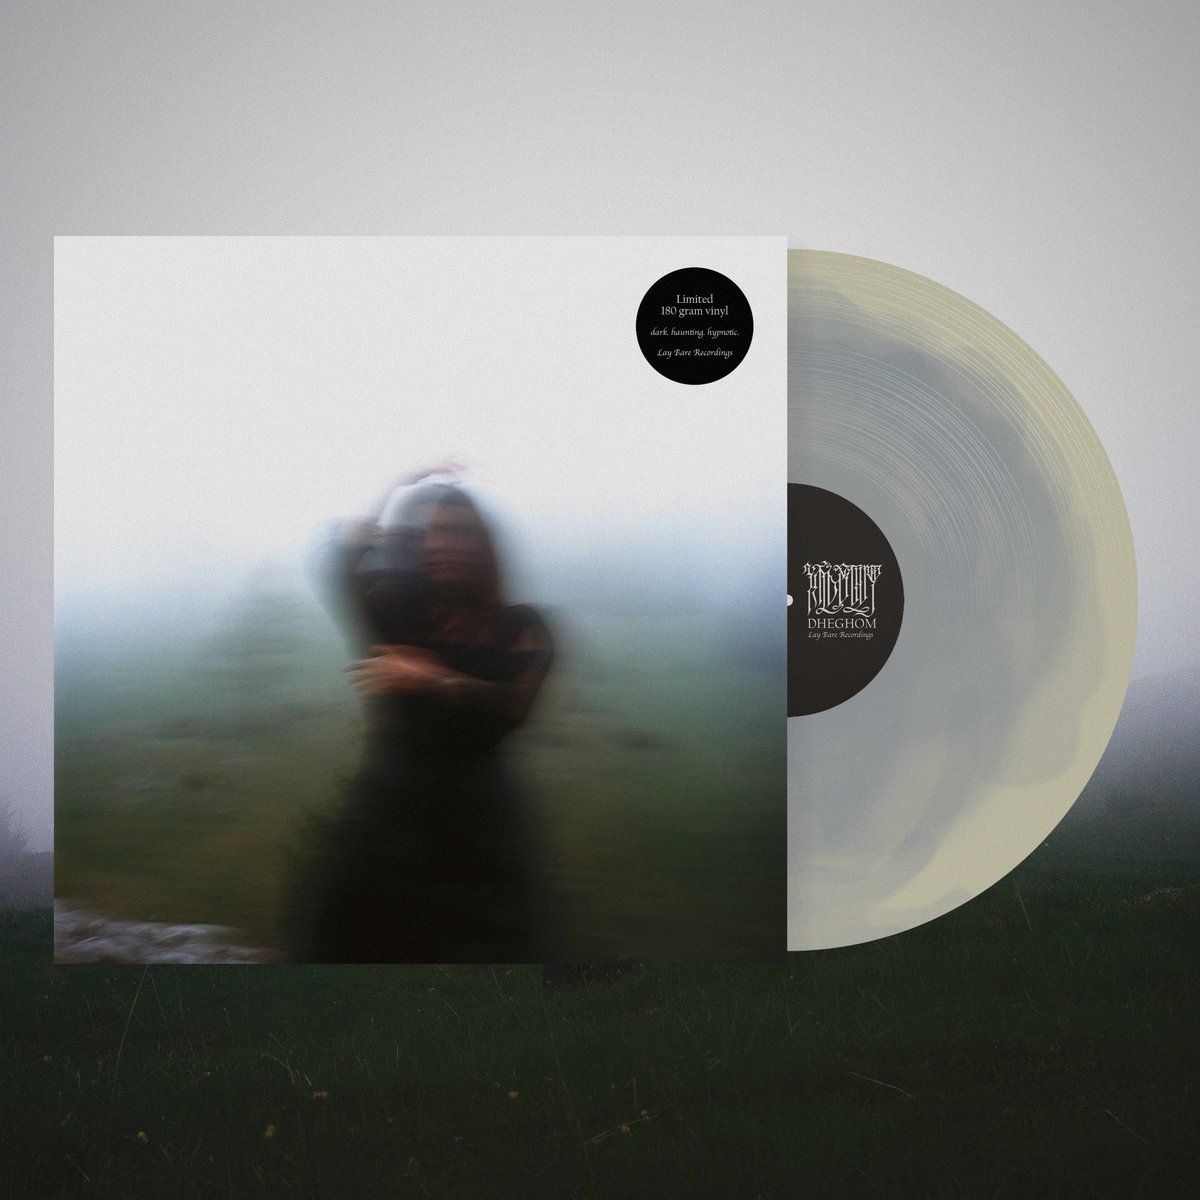 1 month till #Dheghom is out. released on ltd 180 gram #vinyl in two variants: black & ‘fog’. comes with a gorgeous lyric #handillustrated booklet with #analoguephotography, pre-order via @LayBareRecs (link in bio) thank you 🤍
#ambientfolk #darkfolk #musiconvinyl #vinylcollector